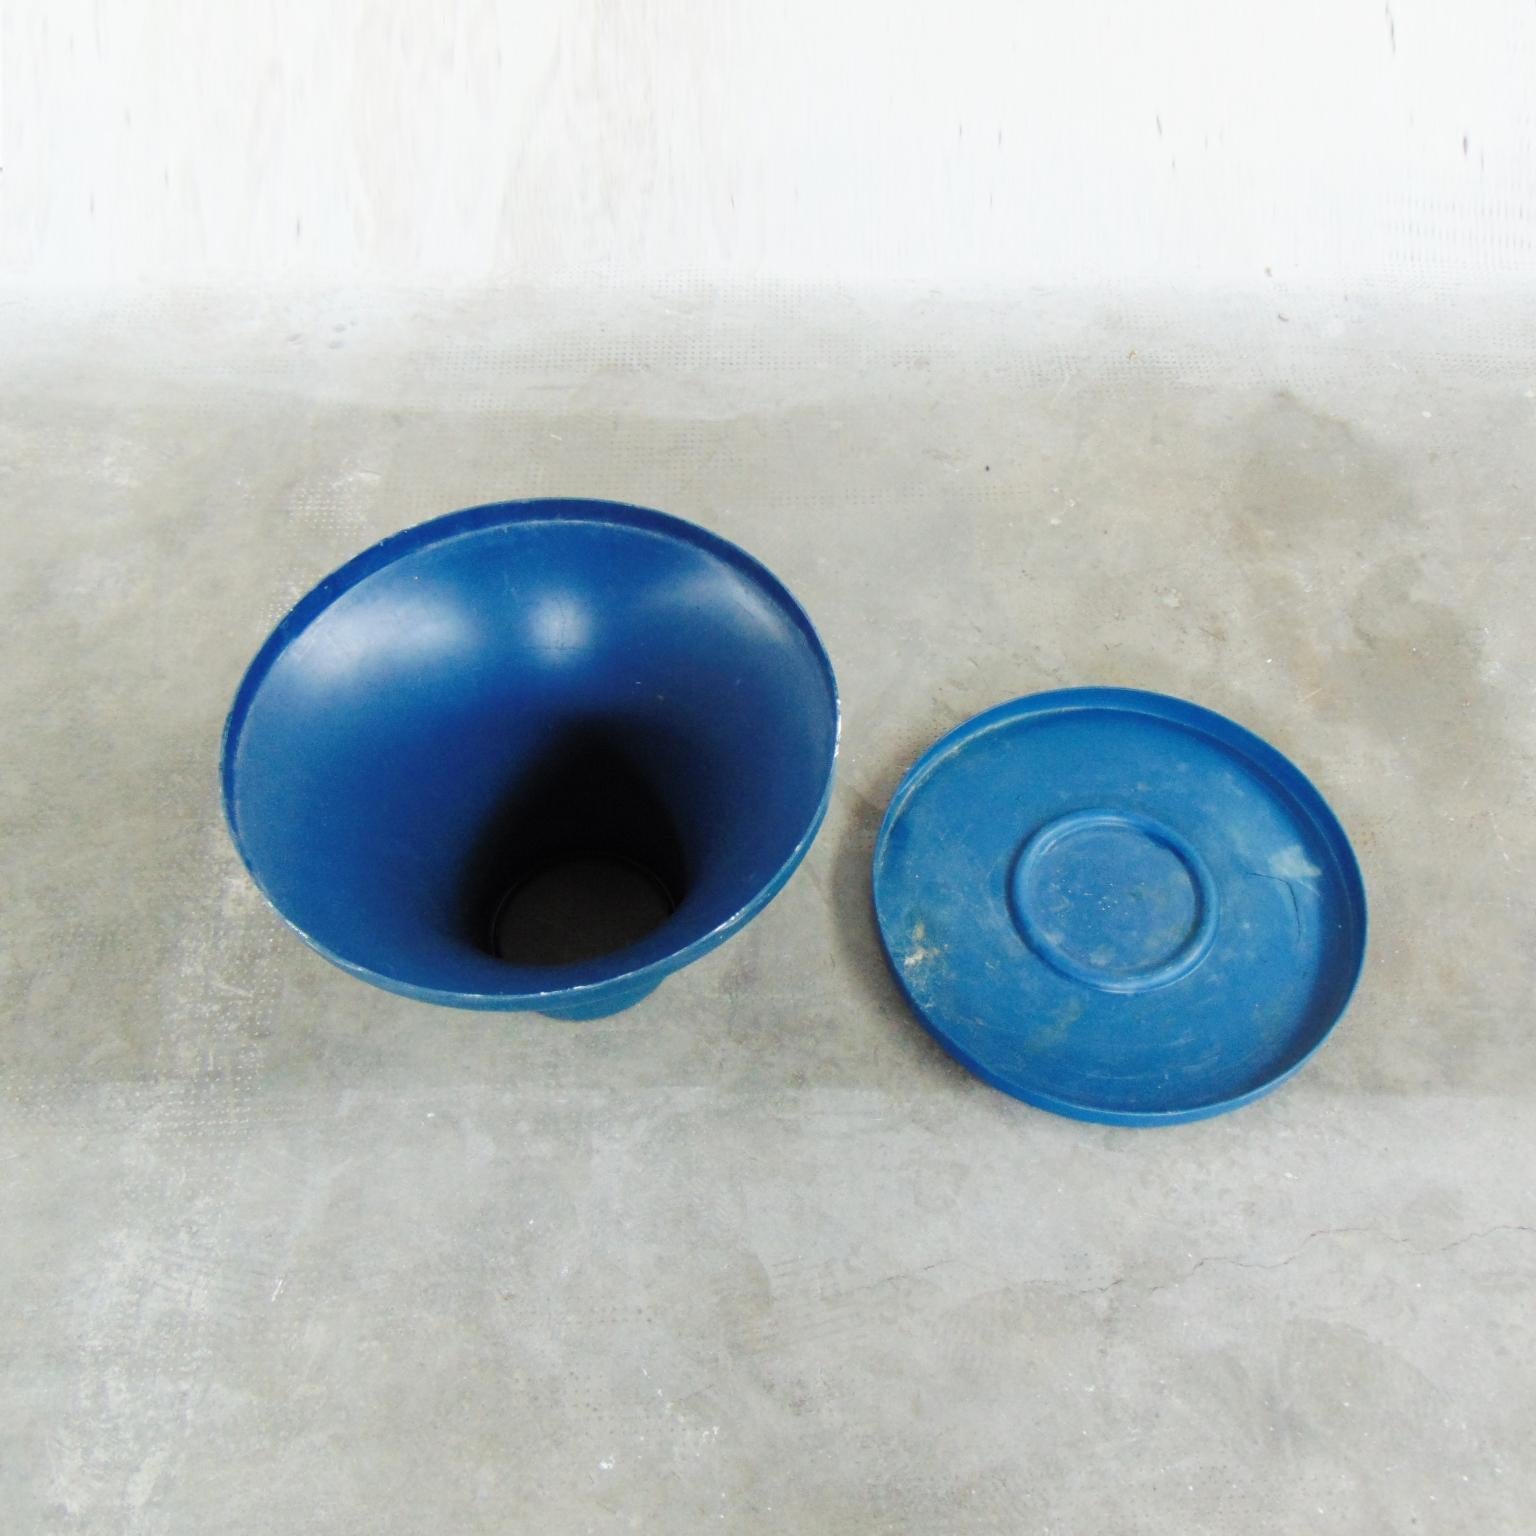 1972 Umbrella Stand in Blue Thermoformed Plastic by R. Lera for Sormani, Italy For Sale 1